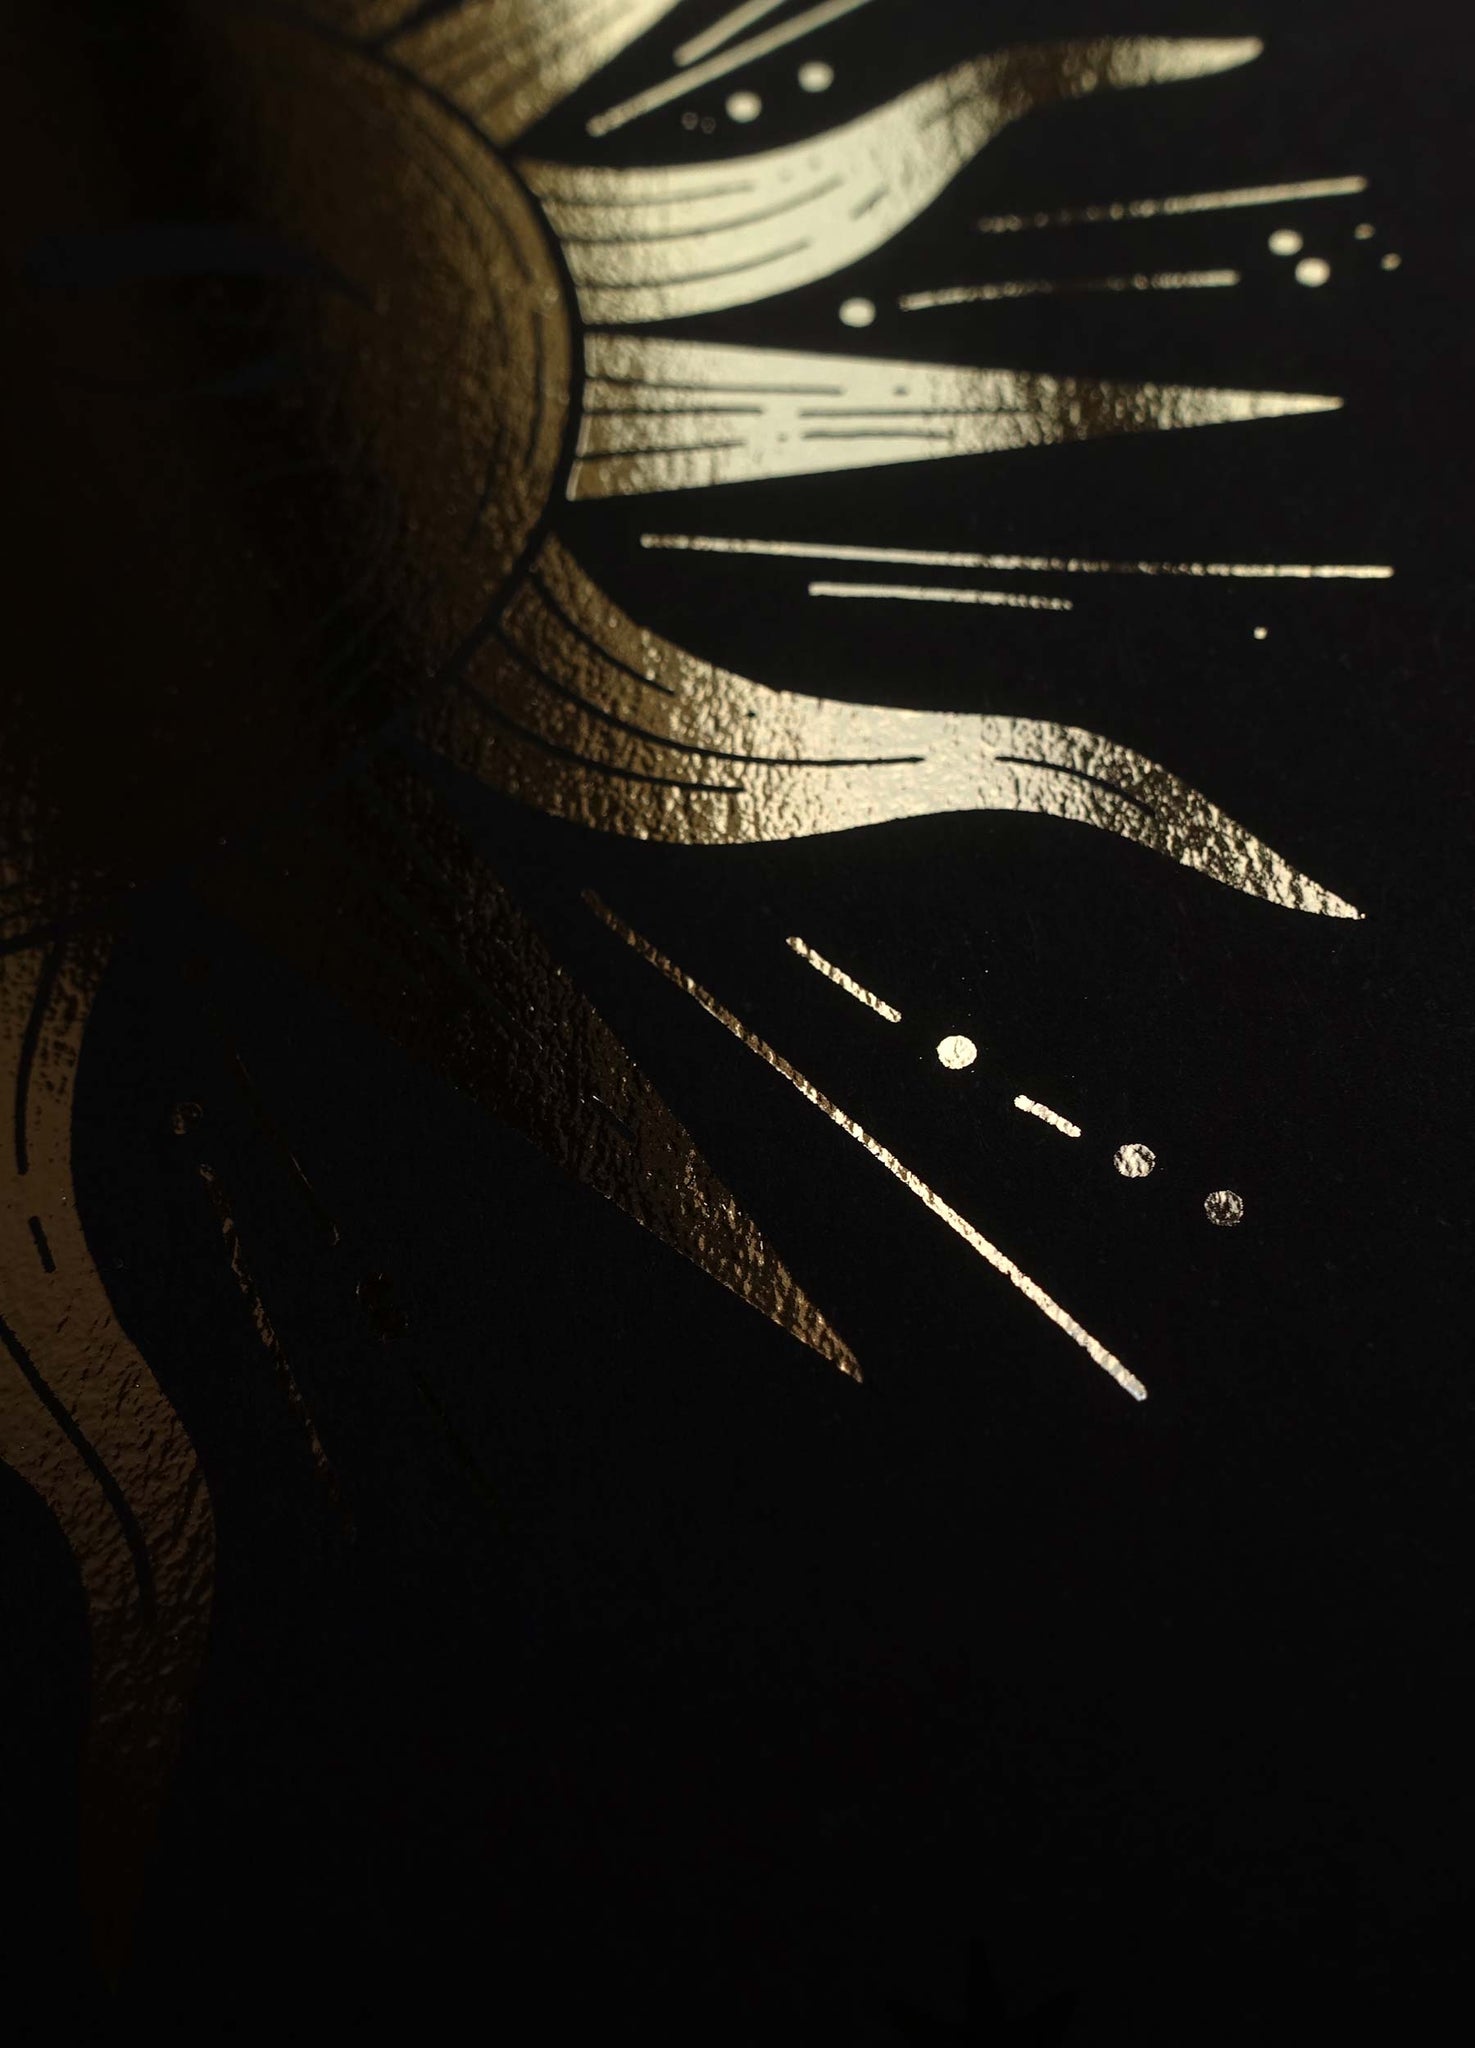 Gold foil print on black paper - Sun & Moon by Cocorrina & Co Studio and Shop